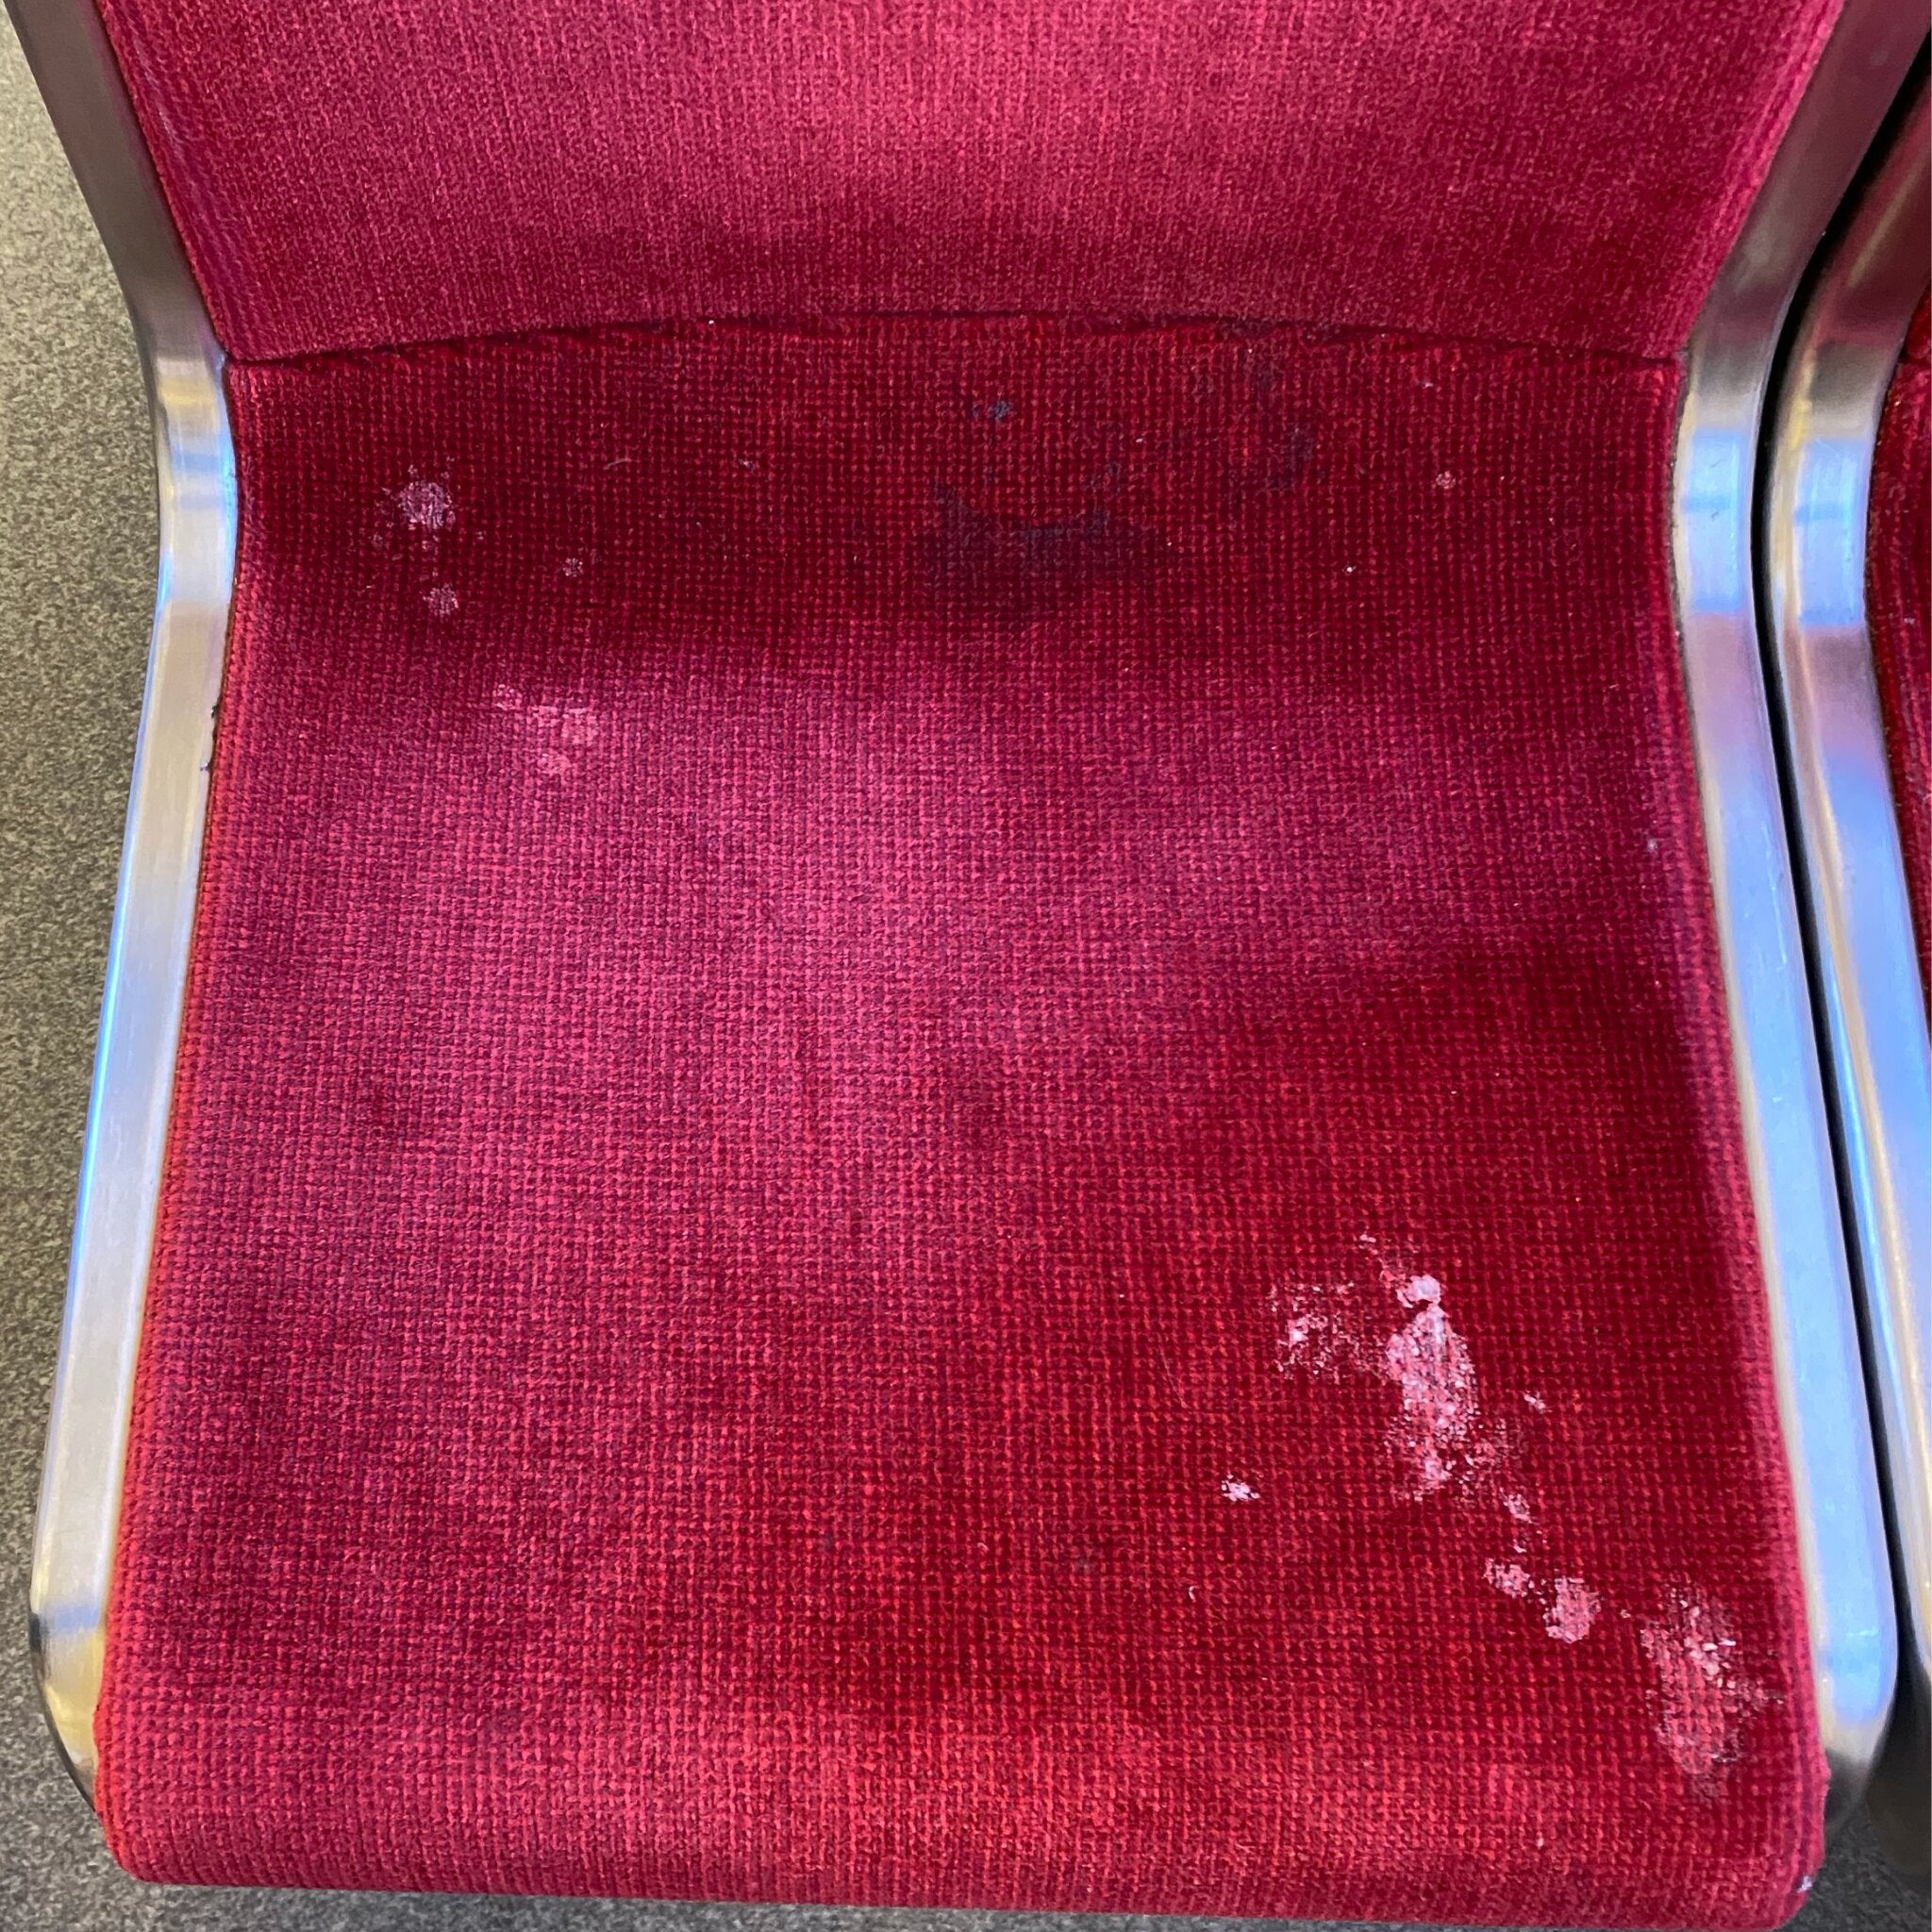 Seat Square | Dirty public transit seat with vomit, spilled liquid, random nasty stuff, and other stains. Meant to show a seat surface that needs Seat Square